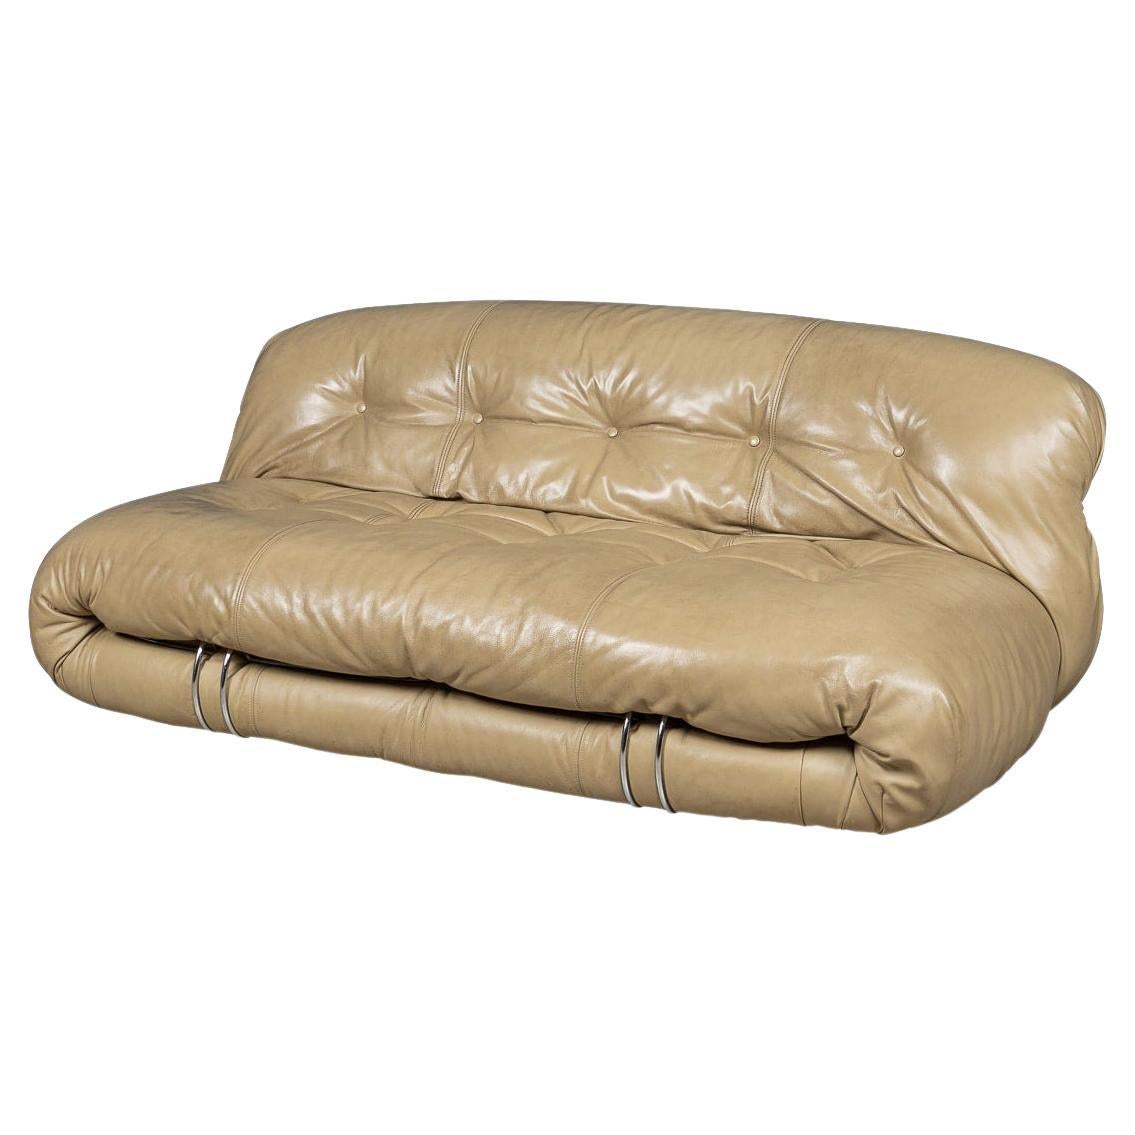 Italian 20th Century Beige "Soriana" Leather Sofa By Tobia Scarpa For Cassina For Sale